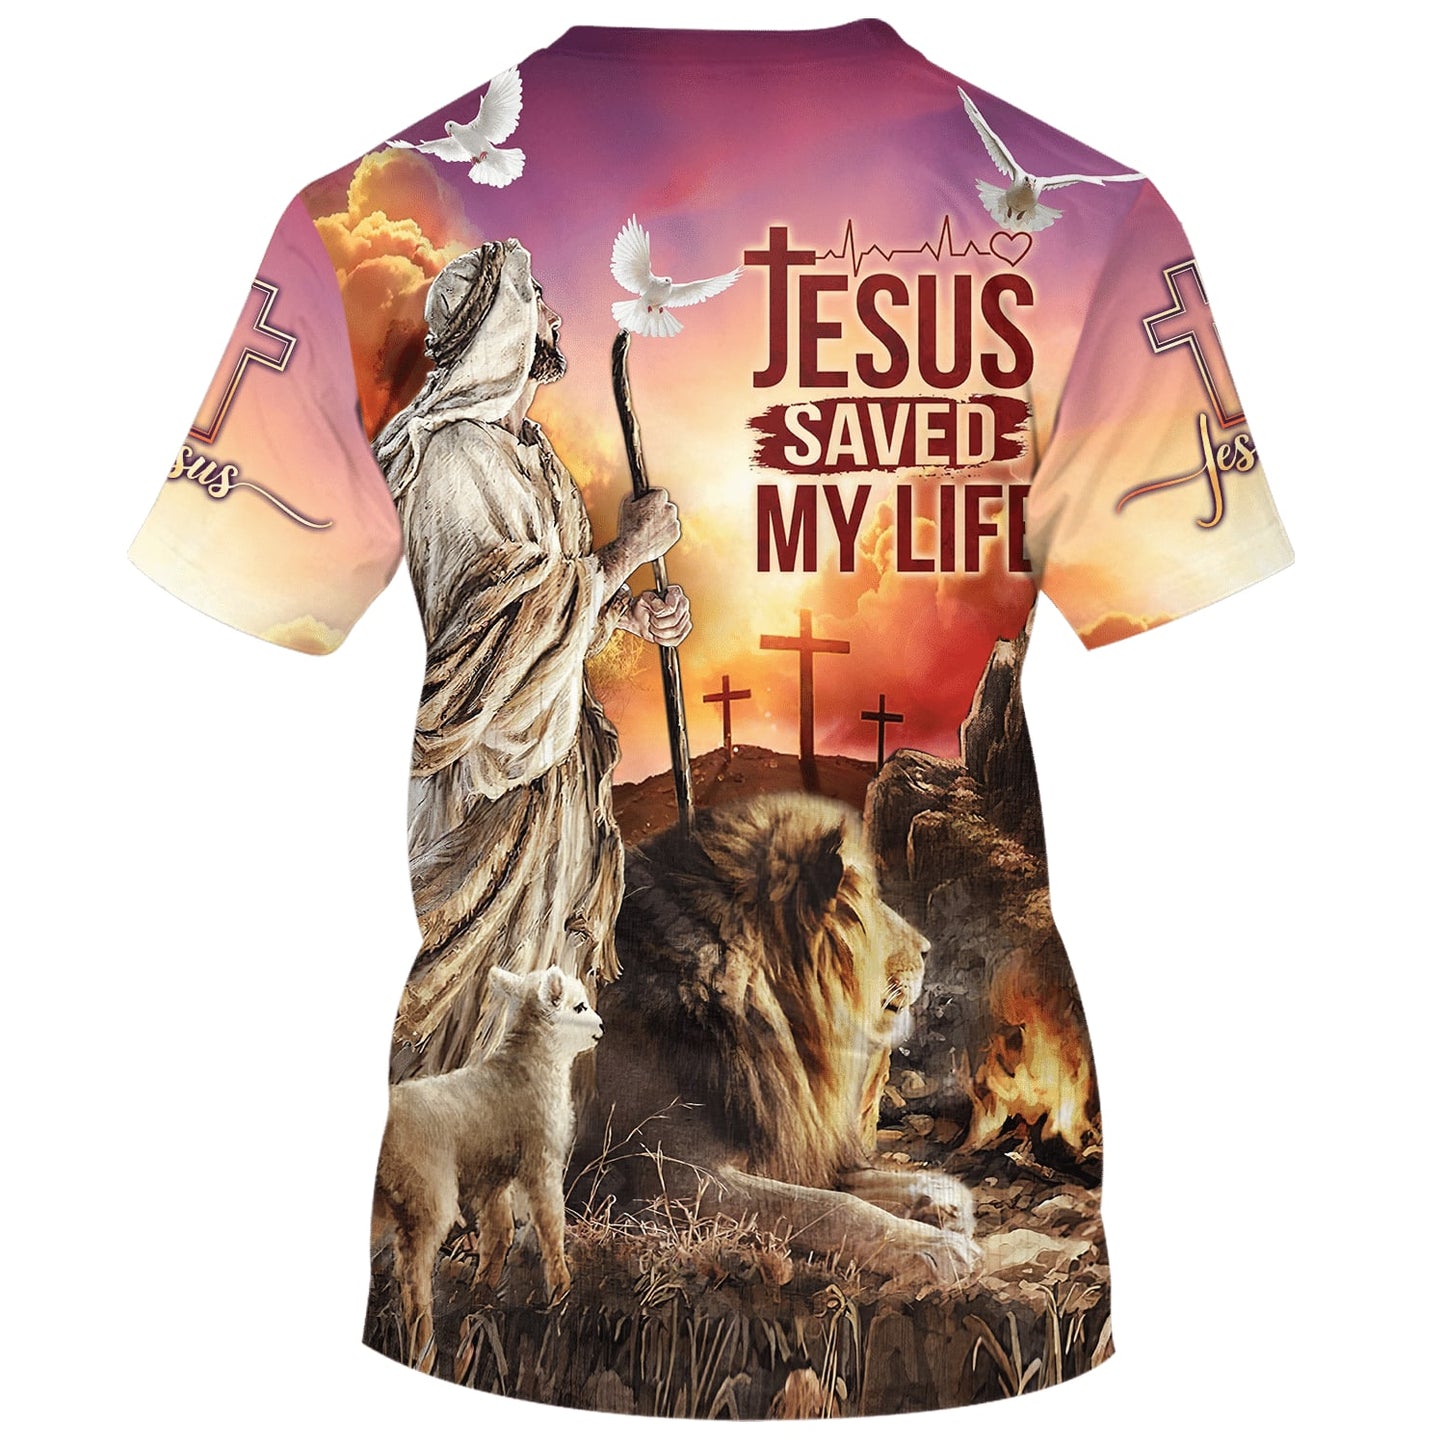 Jesus Saved My Life Shirts - Jesus Lion And The Lamb 3d Shirts - Christian T Shirts For Men And Women